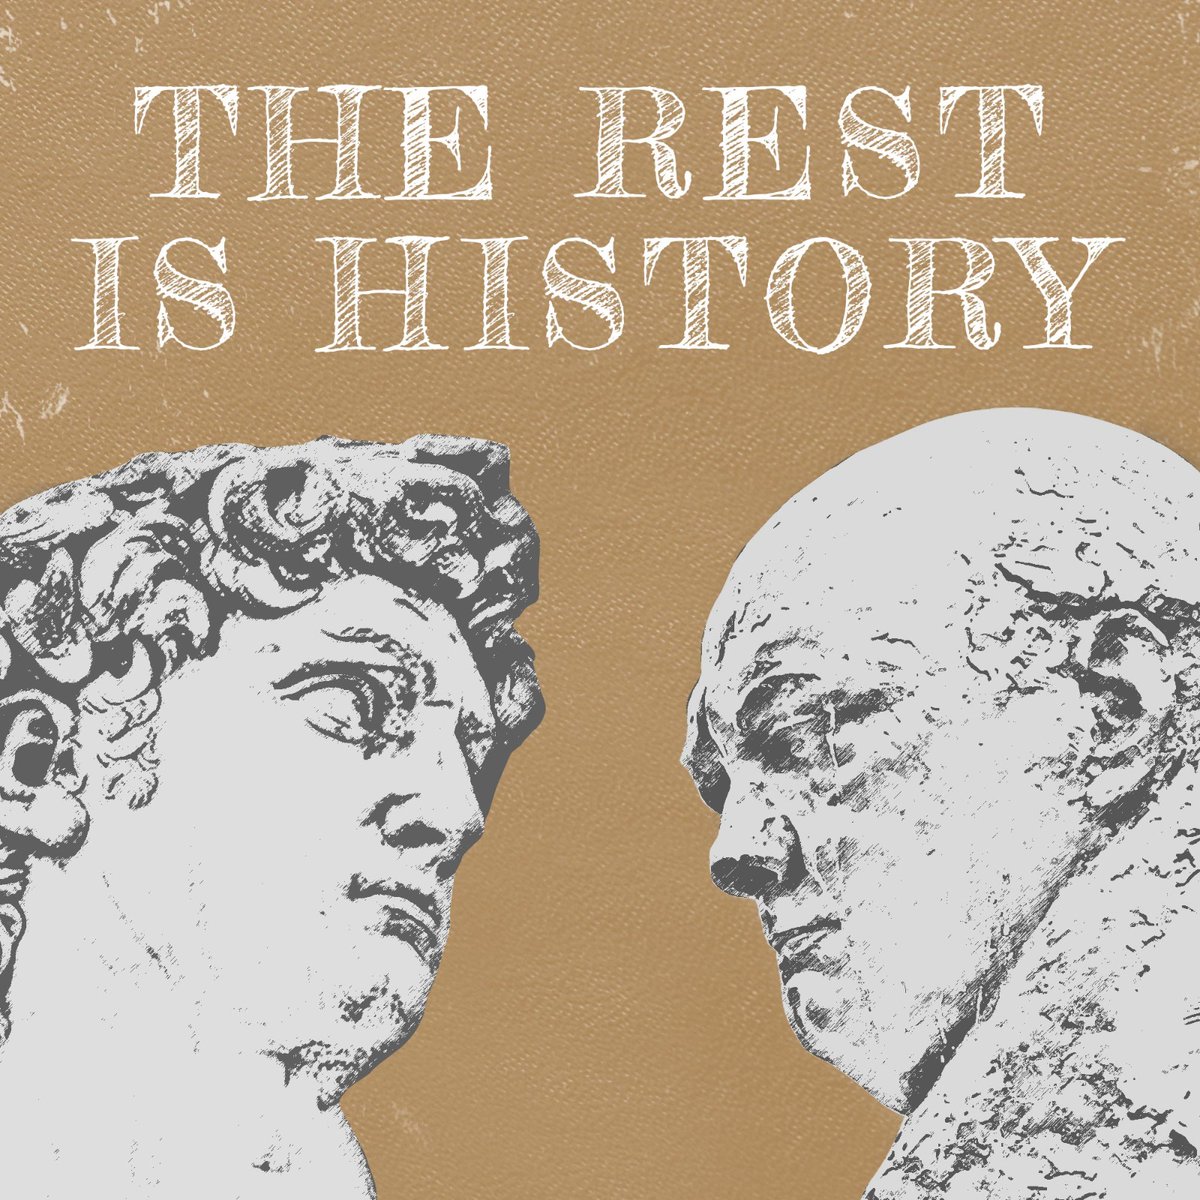 .@TheRestHistory is the world's most popular history podcast—so it was a nice surprise to hear co-host @dcsandbrook give a shout-out to the #CallOfCthulhu #TTRPG in a recent subscriber episode!